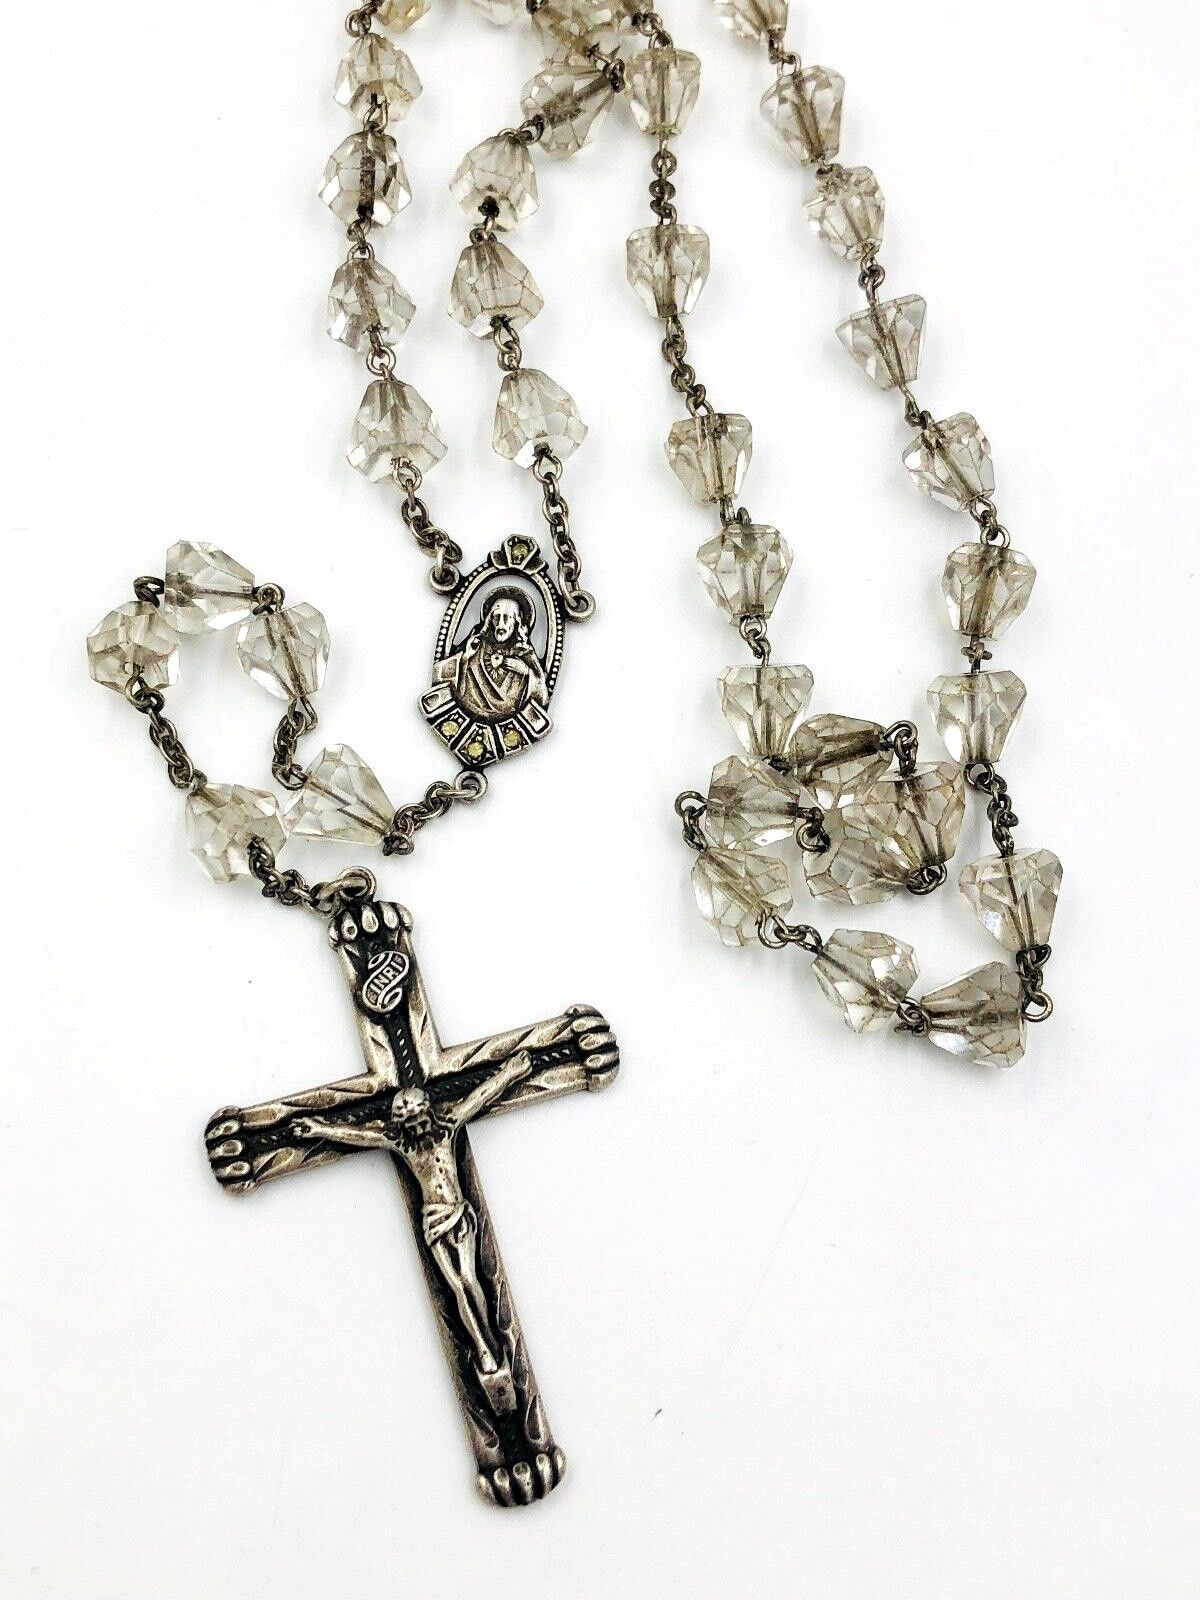 Antique Sterling Silver Religious Catholic Faceted Crystal Glass Bead Rosary